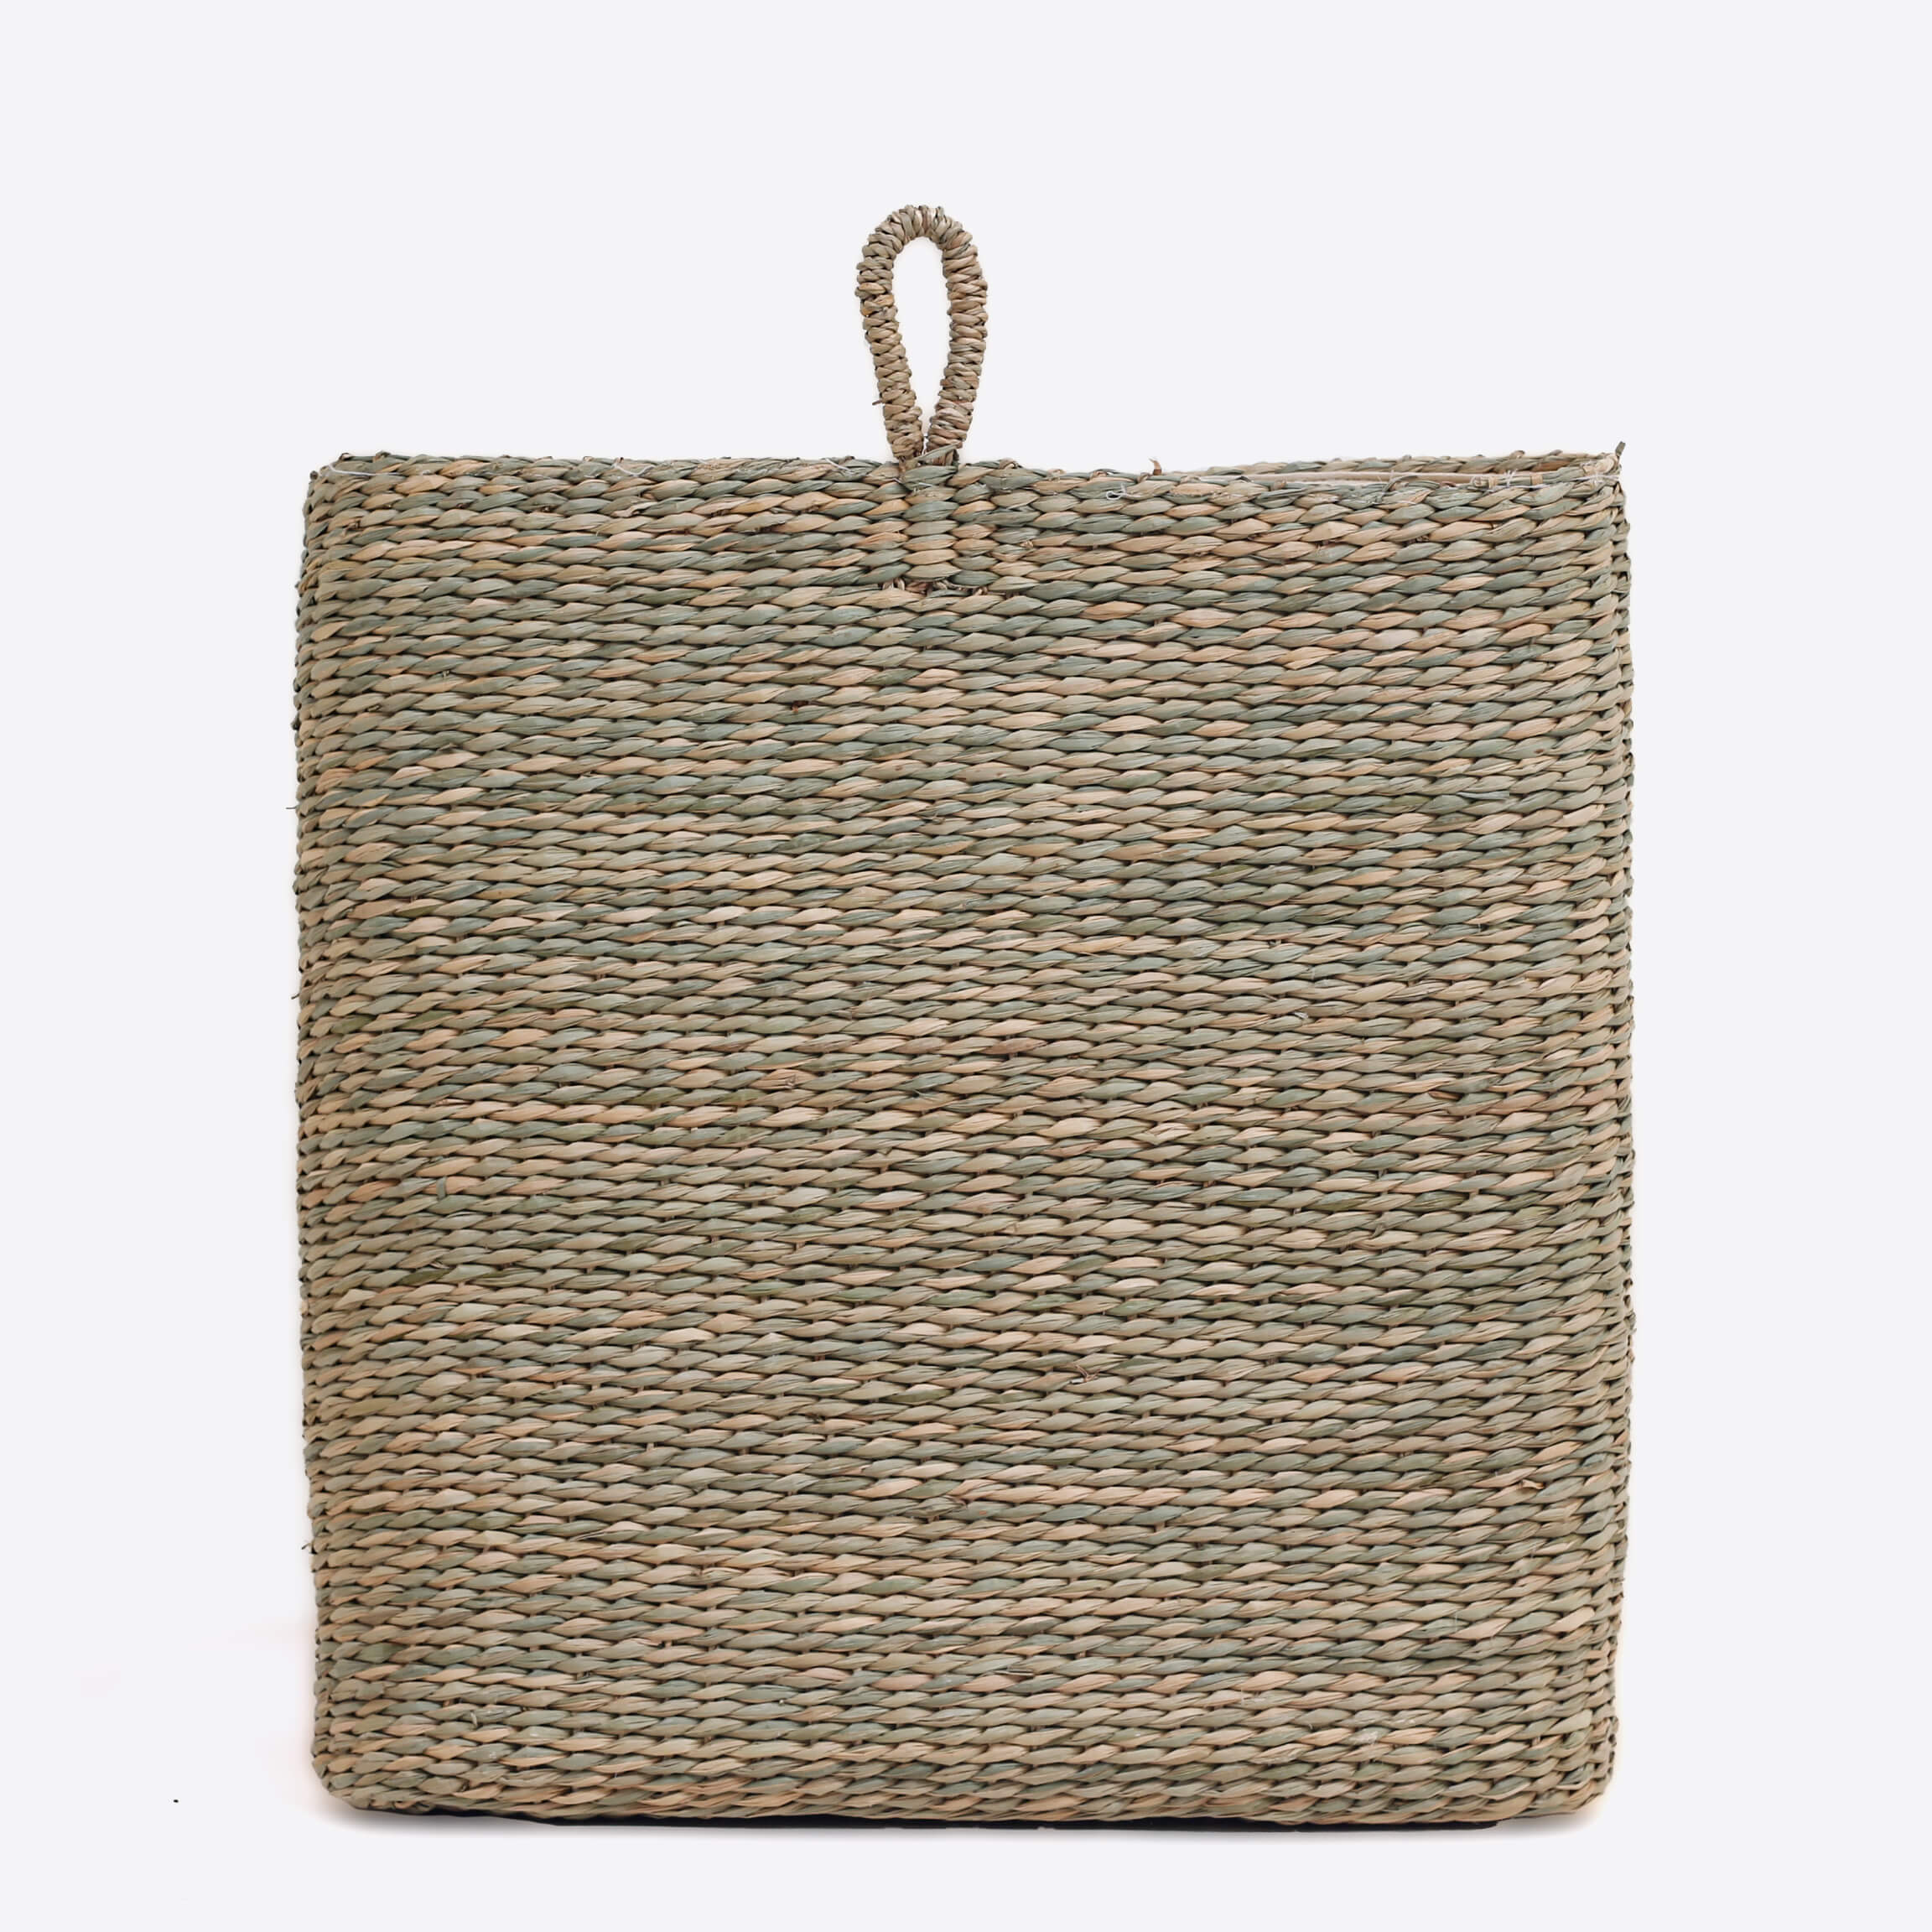 seagrass wall hanging storage basket from only $4.26